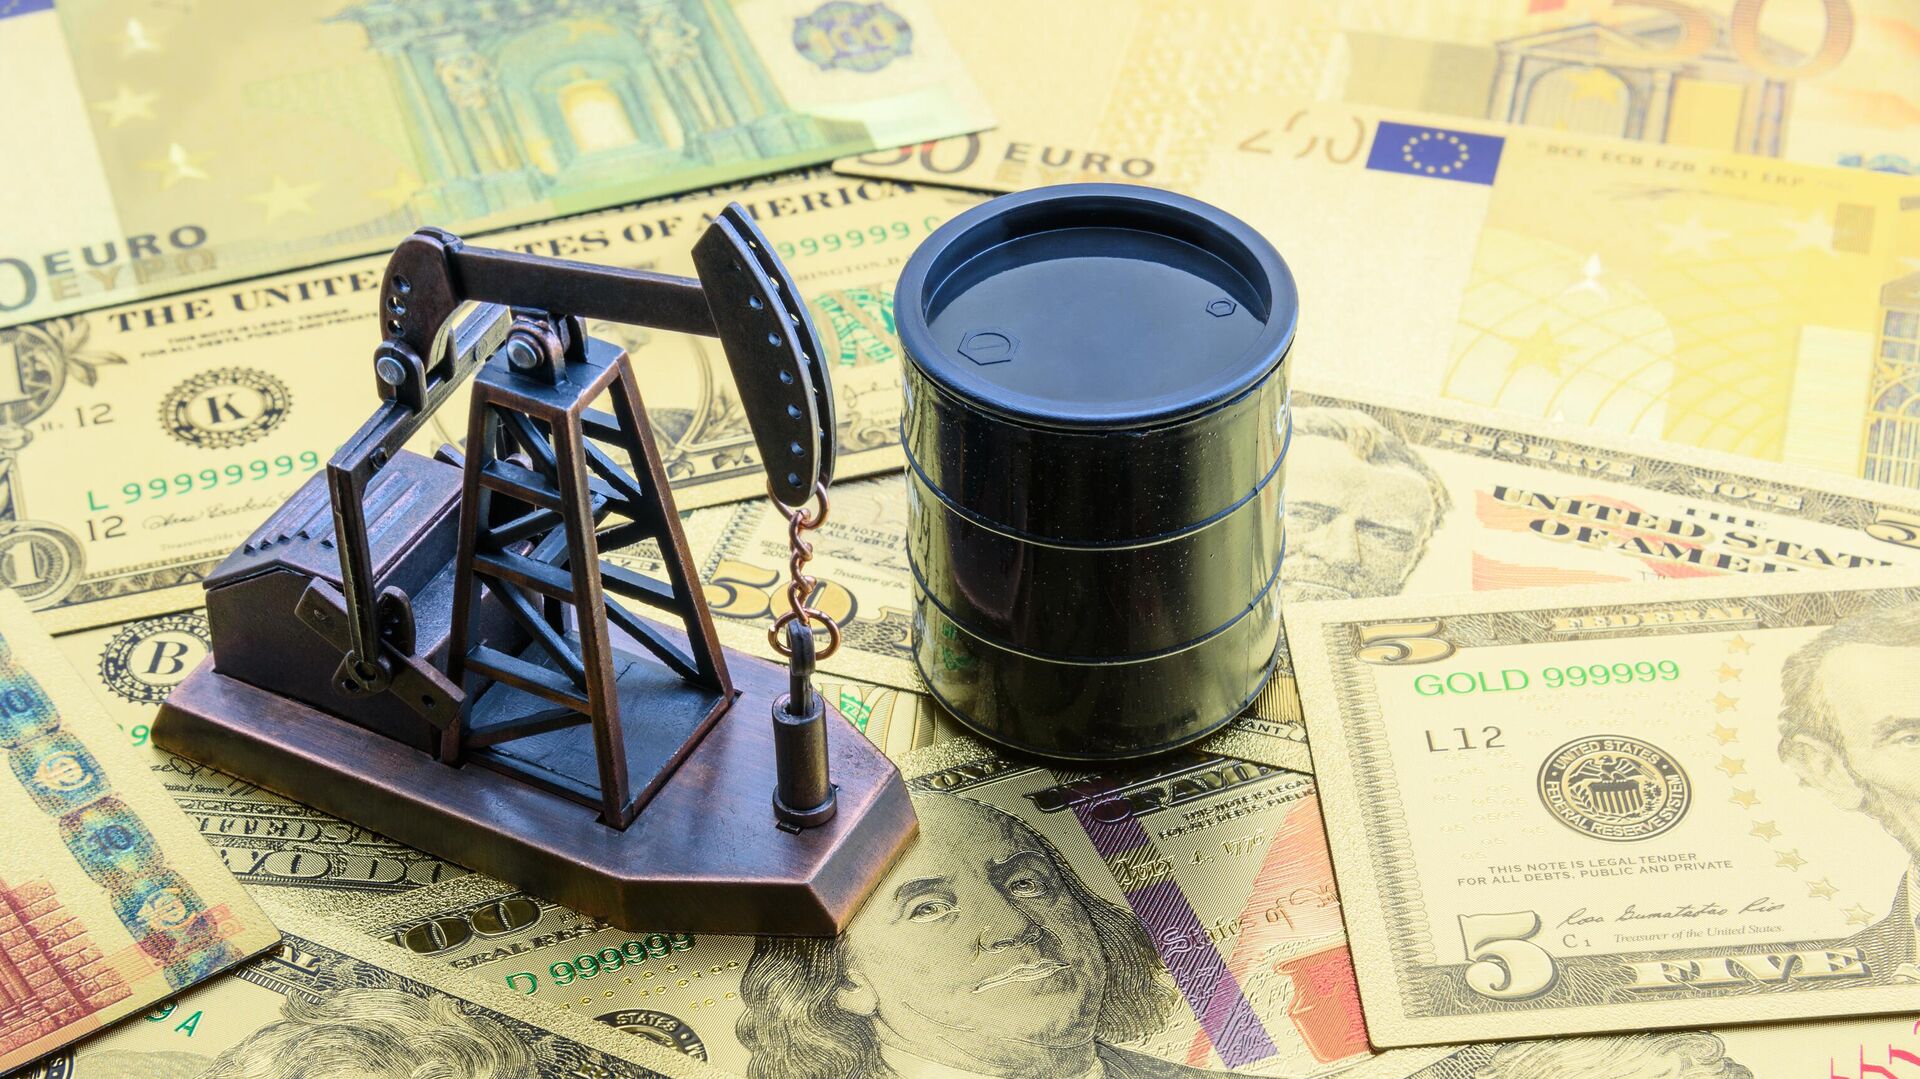 The expert said that the world is facing high inflation due to the increase in oil prices.